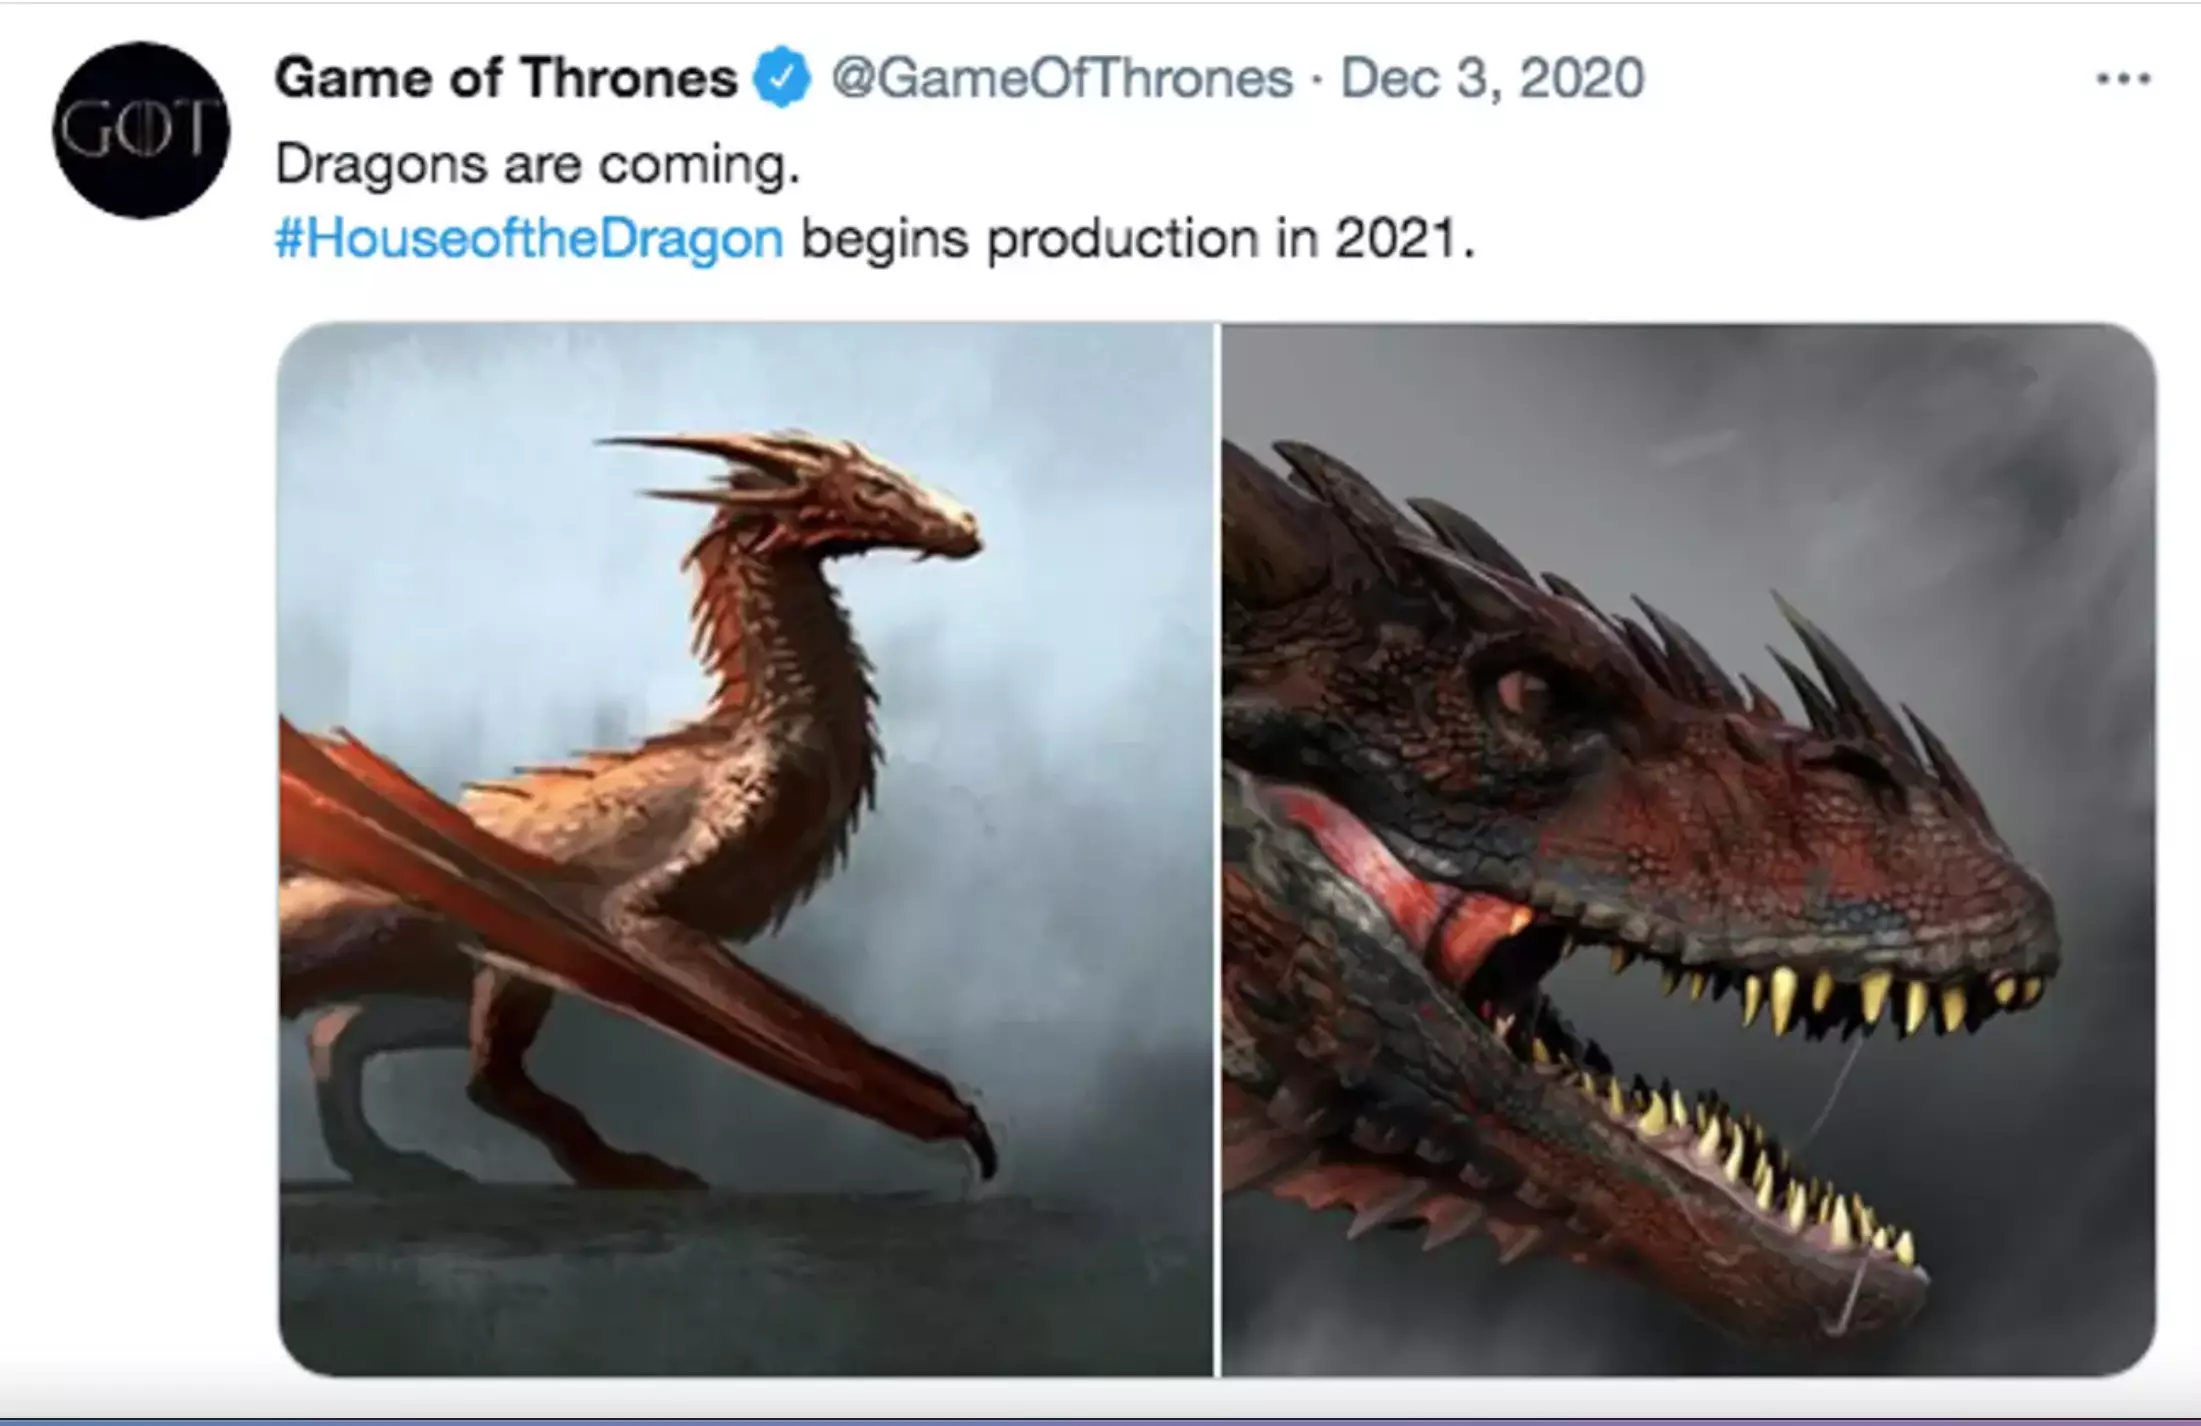 Game Of Thrones teased 'Dragons are coming' (